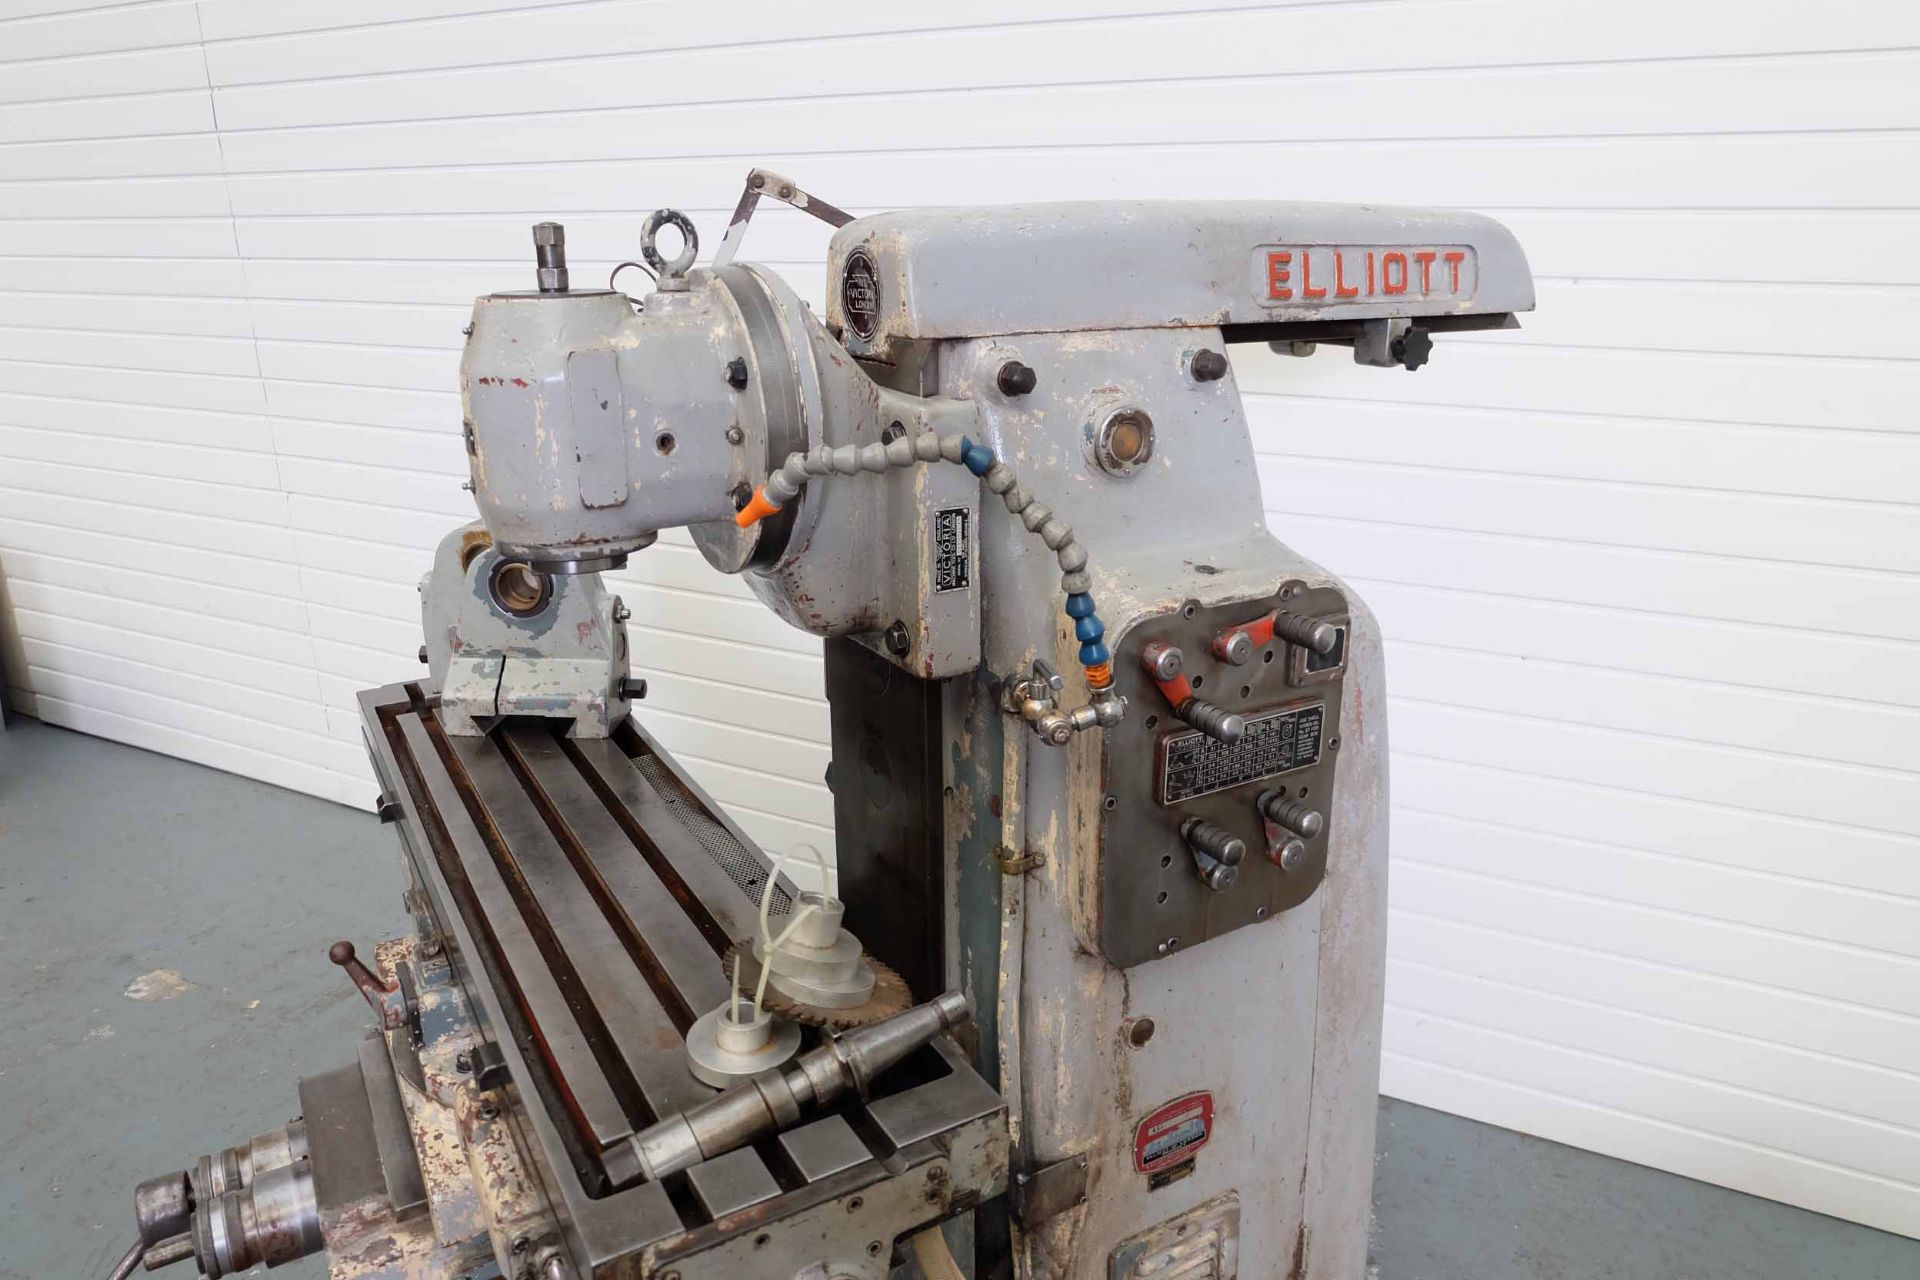 Elliott Victoria Model U2 Universal Milling Machine With Swivelling Vertical Head. Table Size 45" x - Image 2 of 12